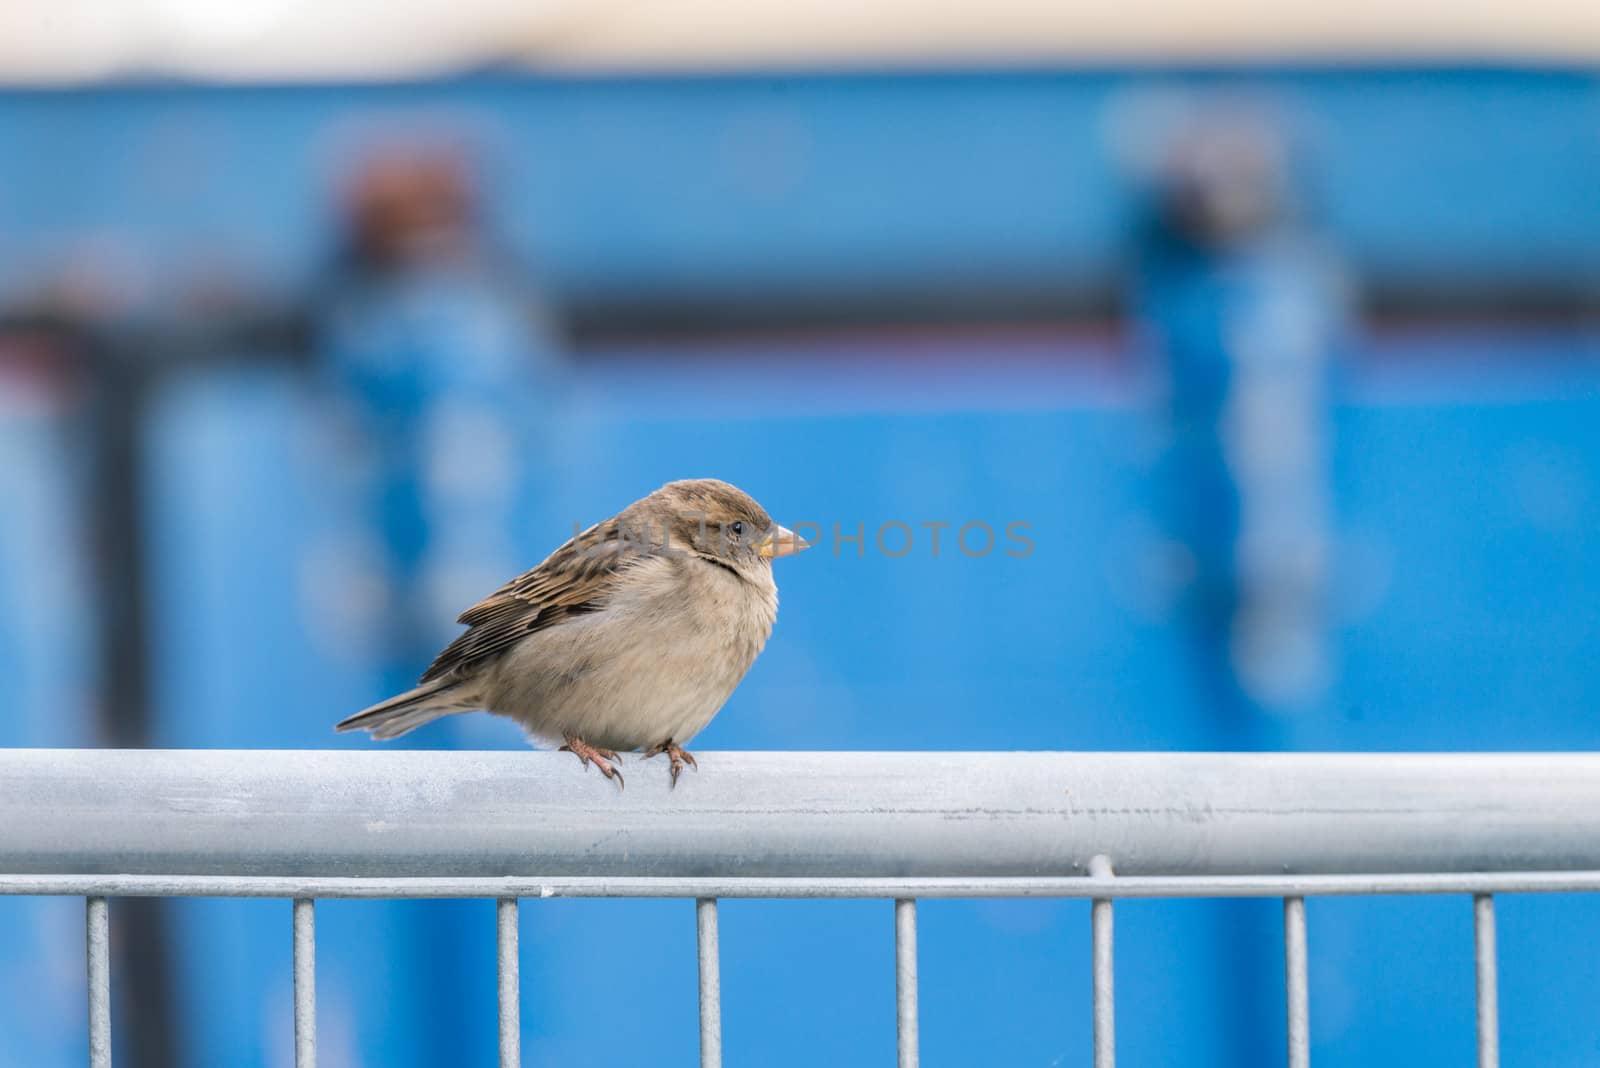 Tiny bird standing on a metal fence during a cold day with blue background